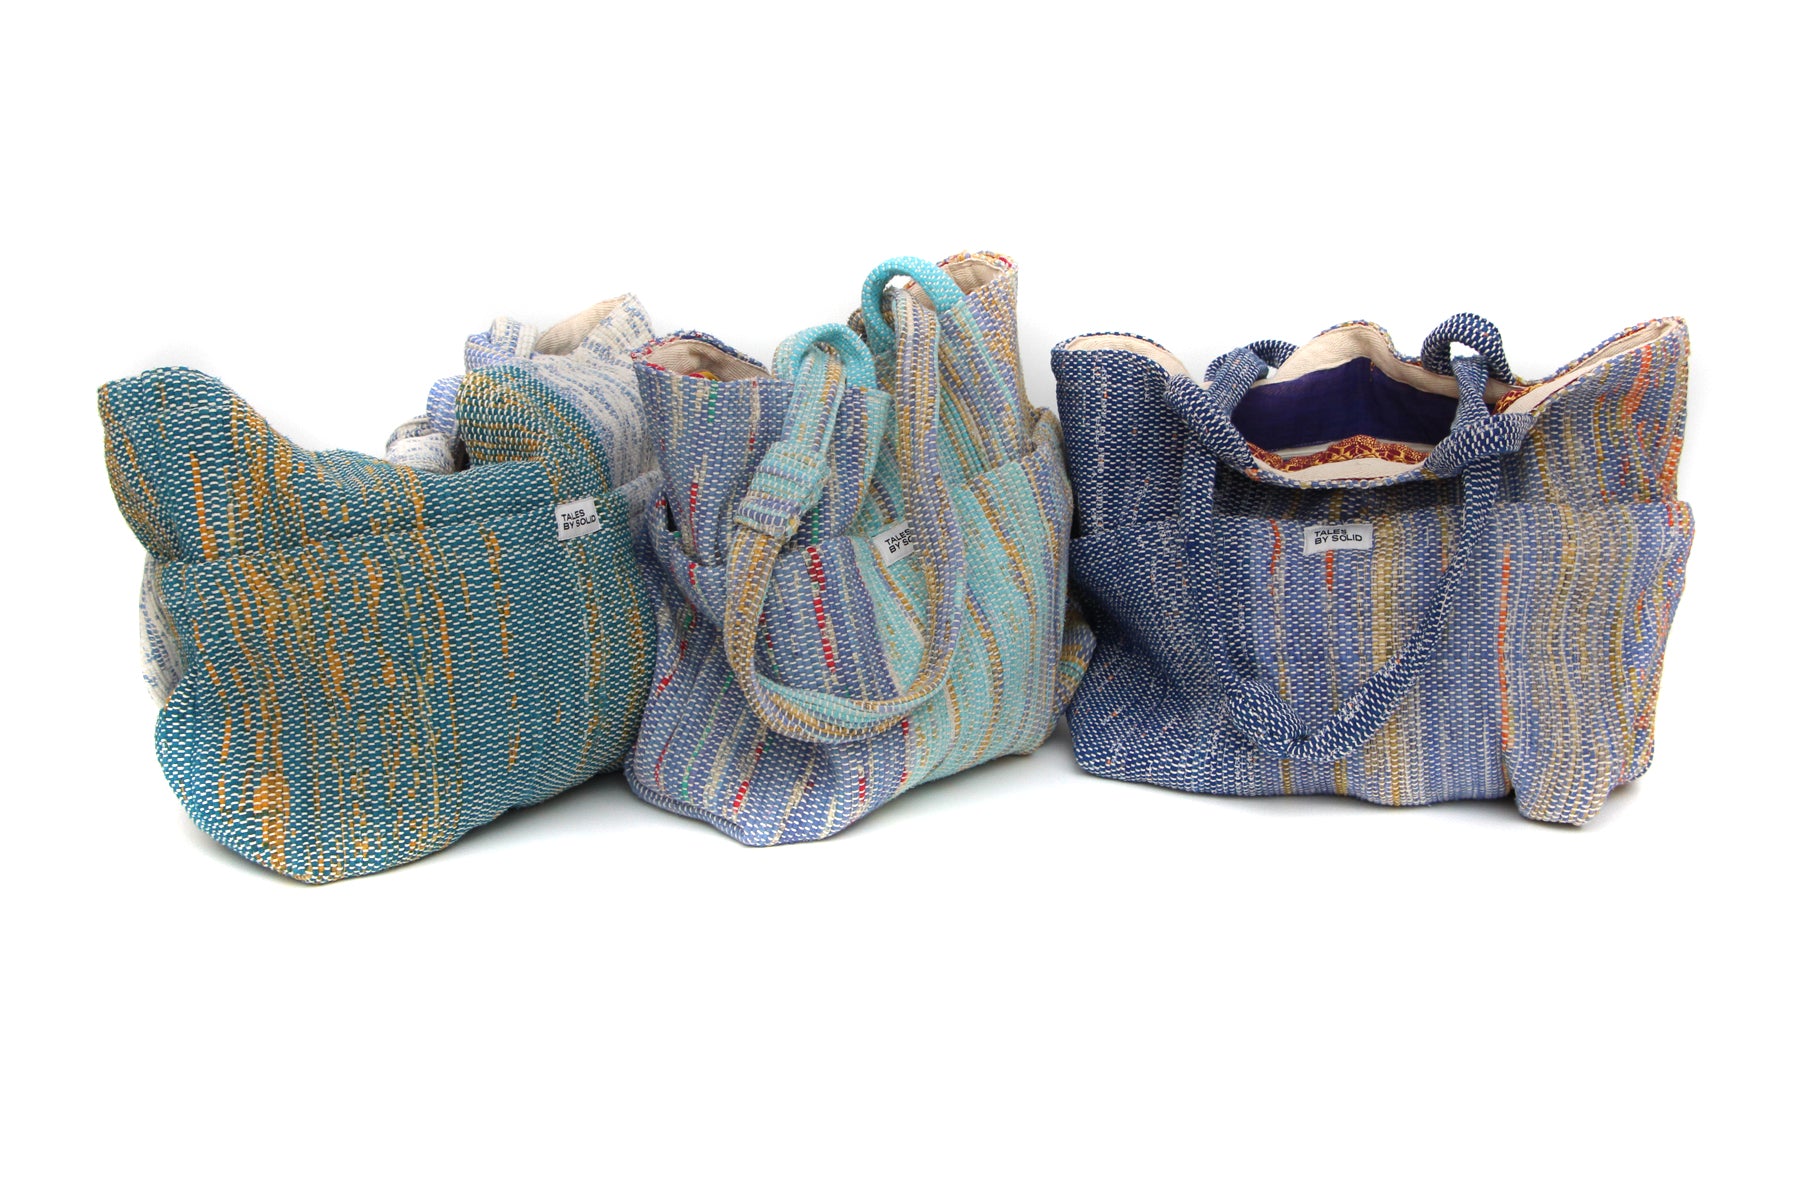 Small Sari Bag 05 - Handcrafted Elegance with a Sustainable Story